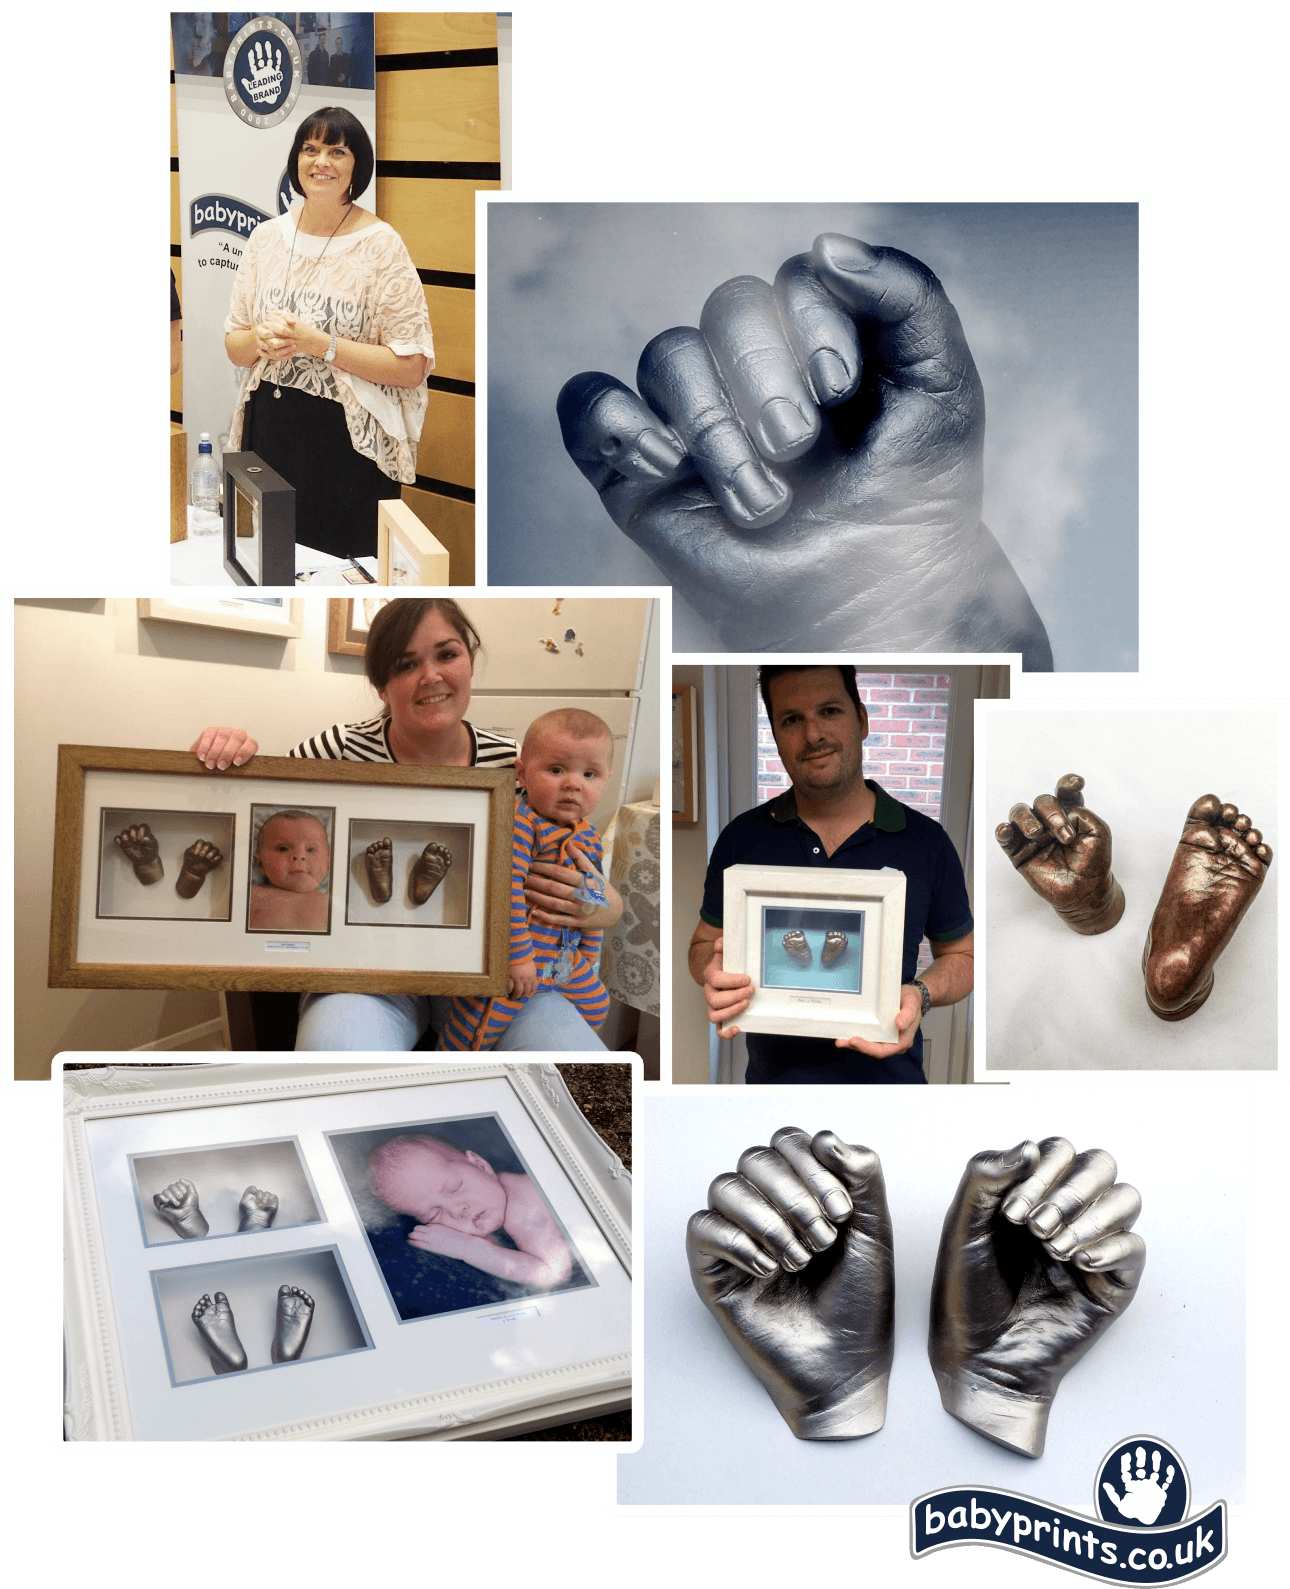 Stansted hands and feet casting services